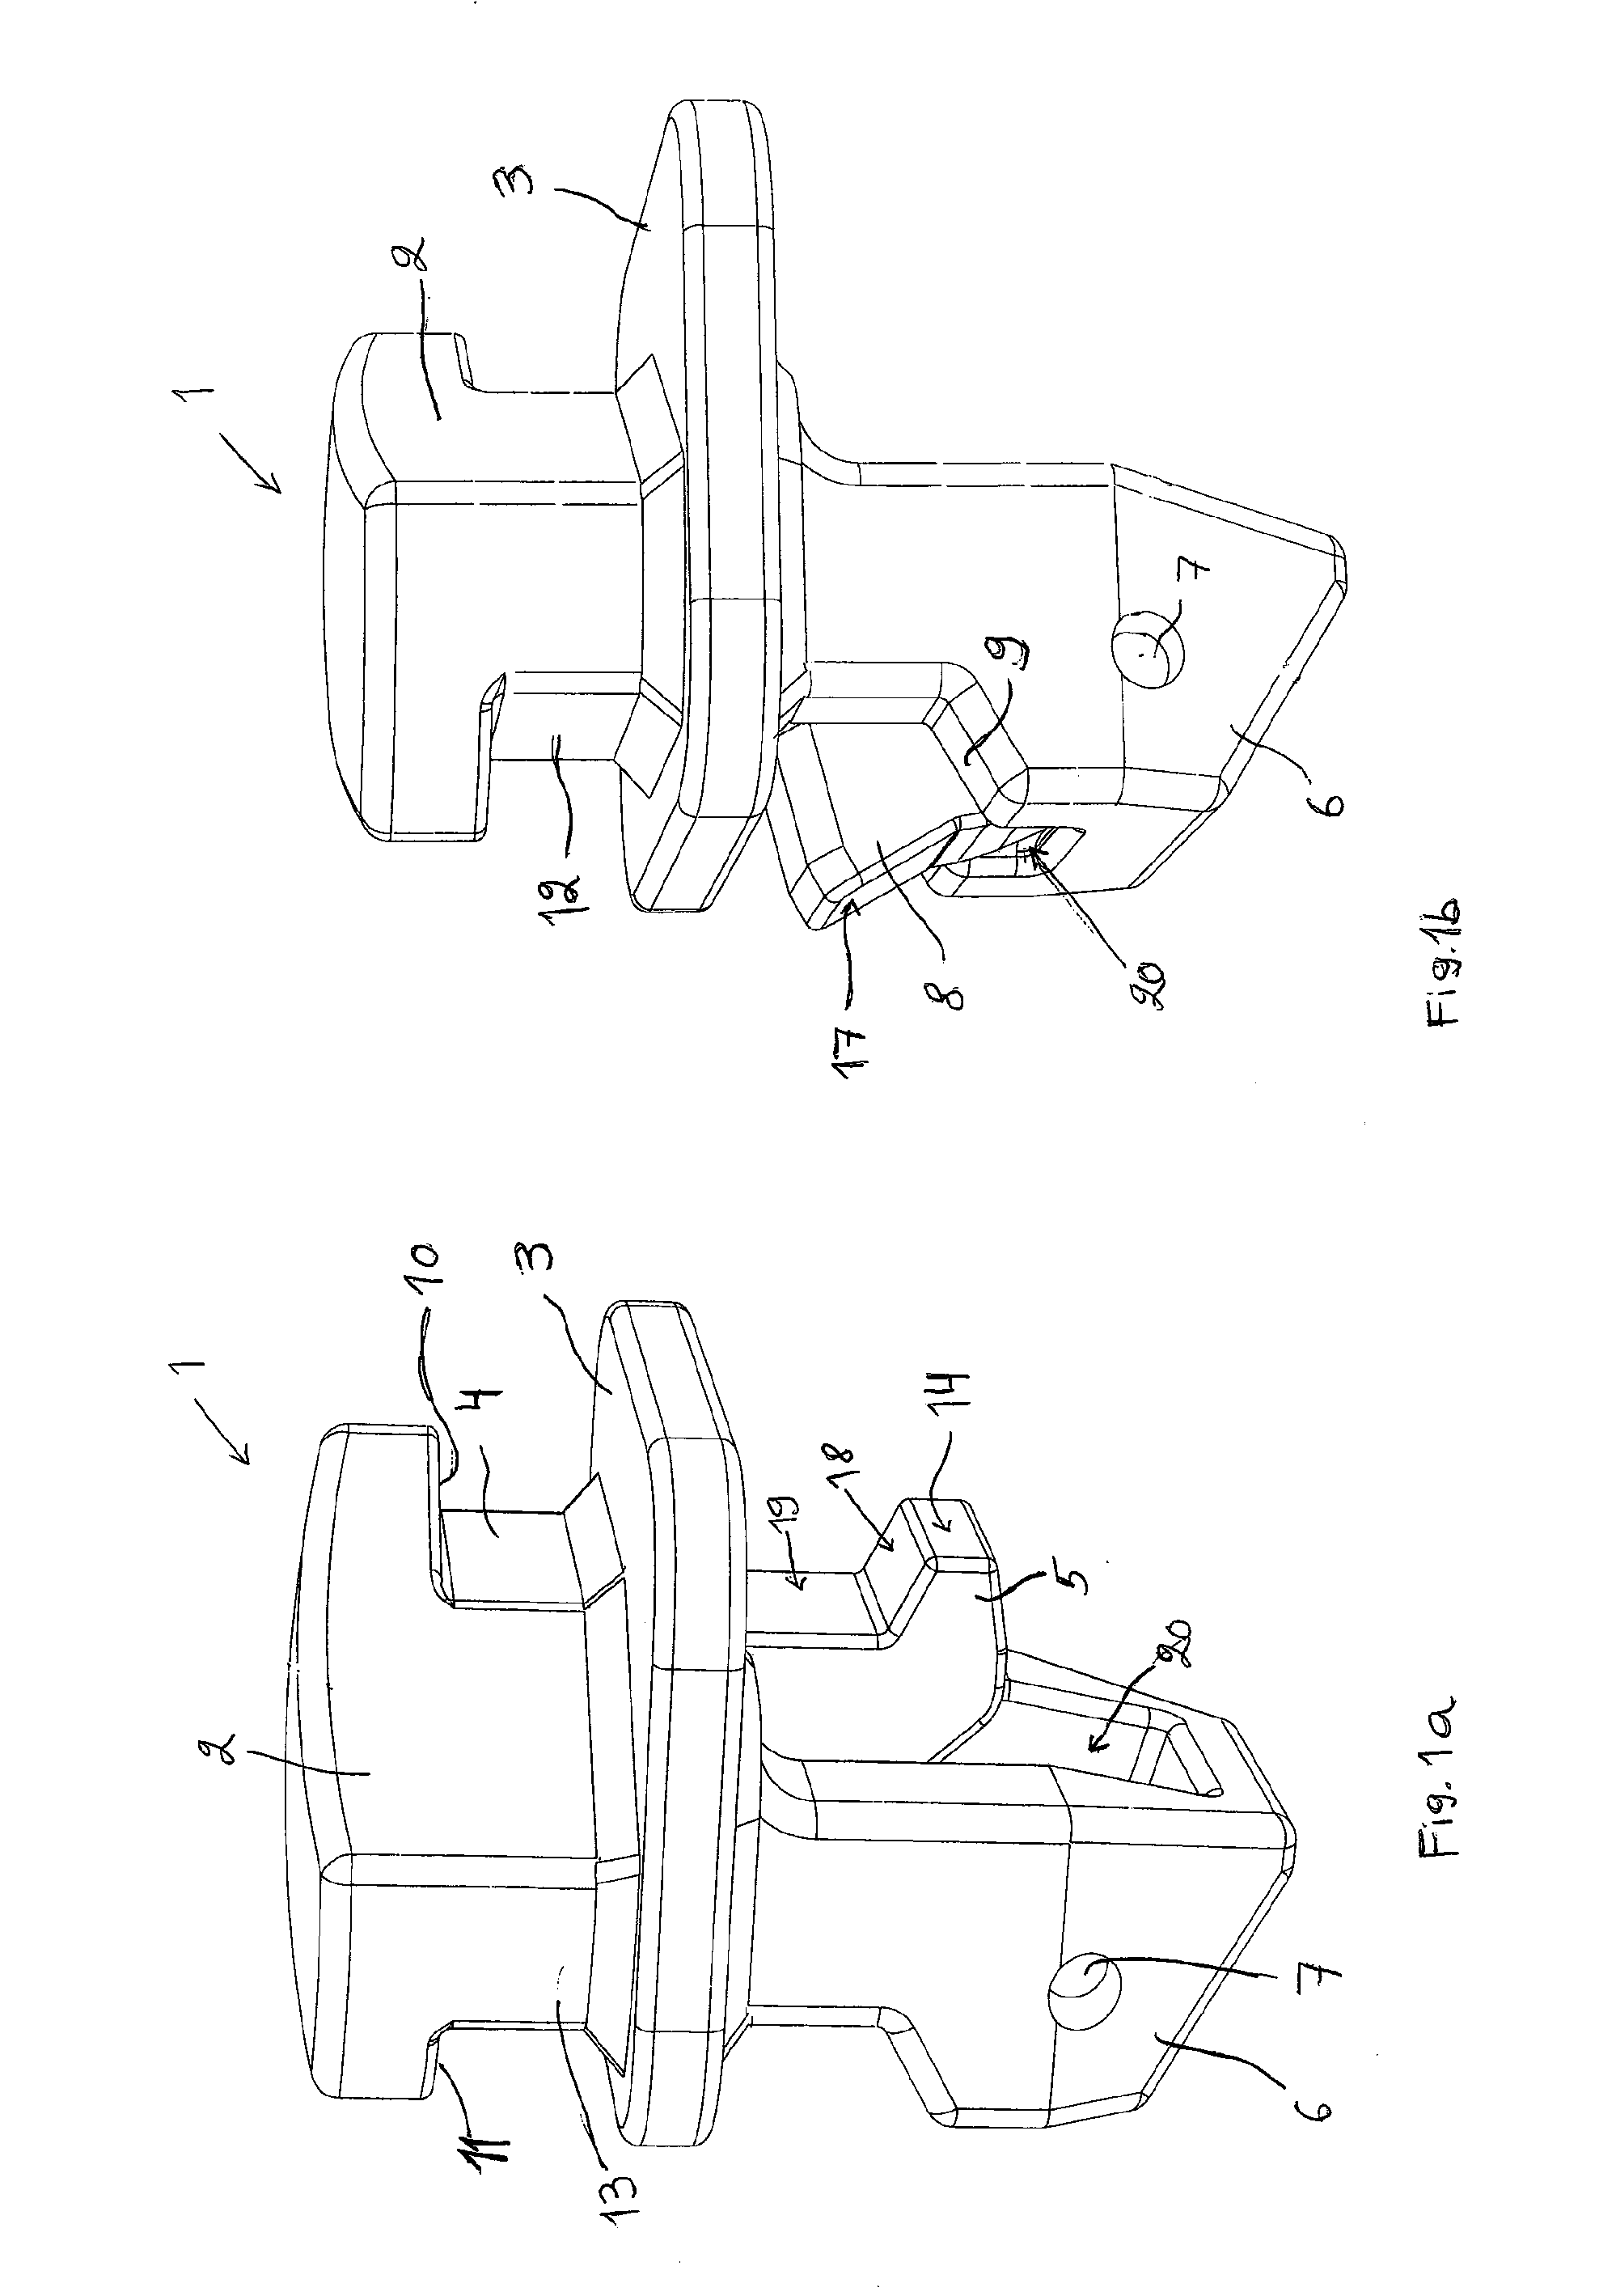 Coupling device for coupling containers, particularly containers used in cargo ships